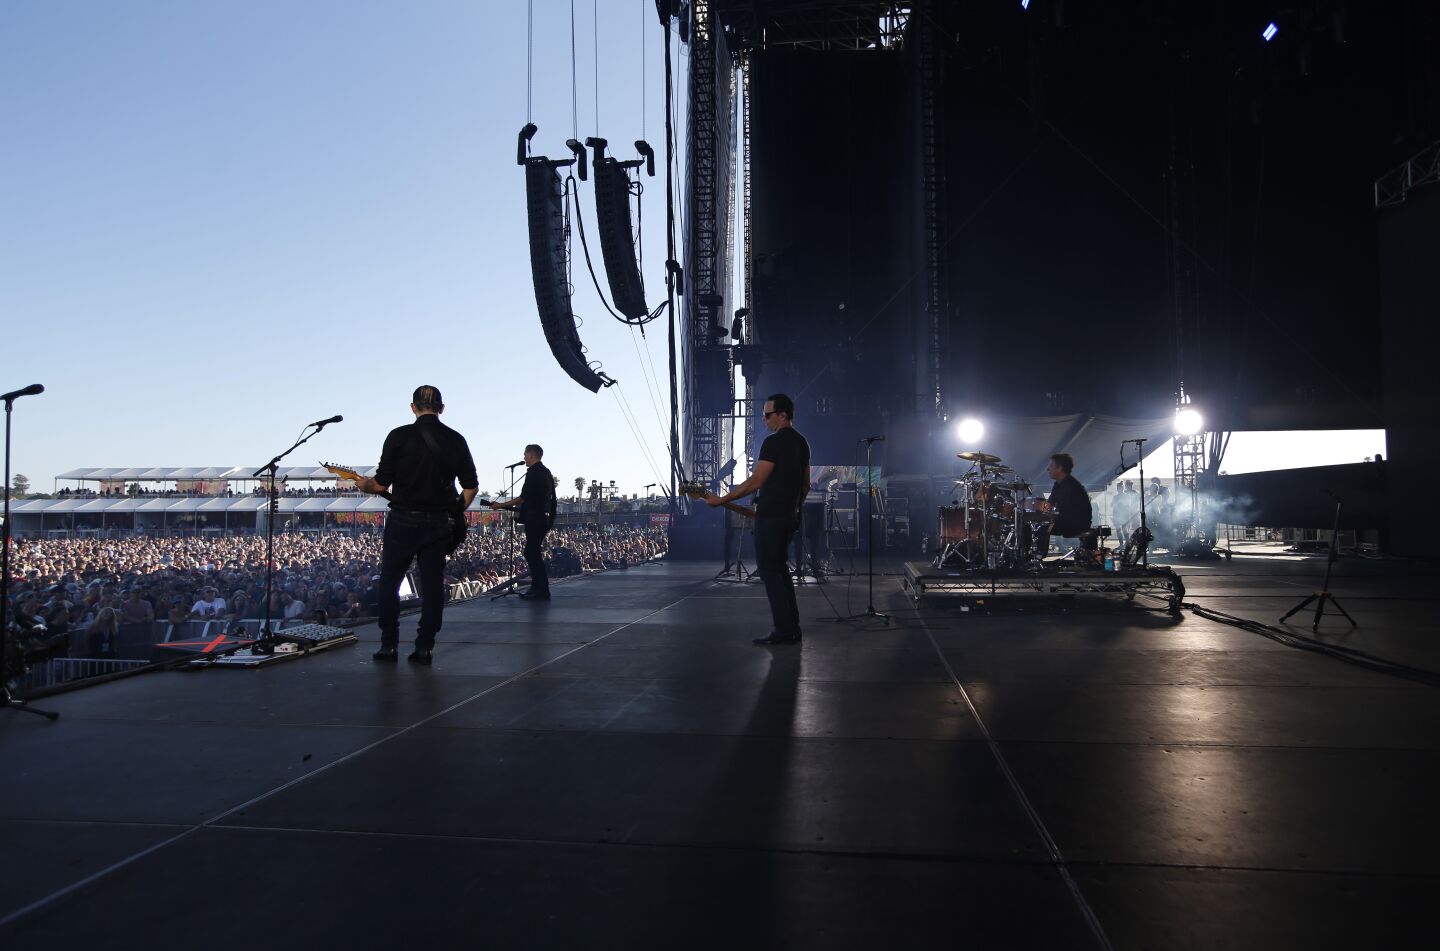 Bryan Adams performs at the Sunset Cliffs stage at KAABOO Del Mar on Saturday, Sept. 14, 2019.